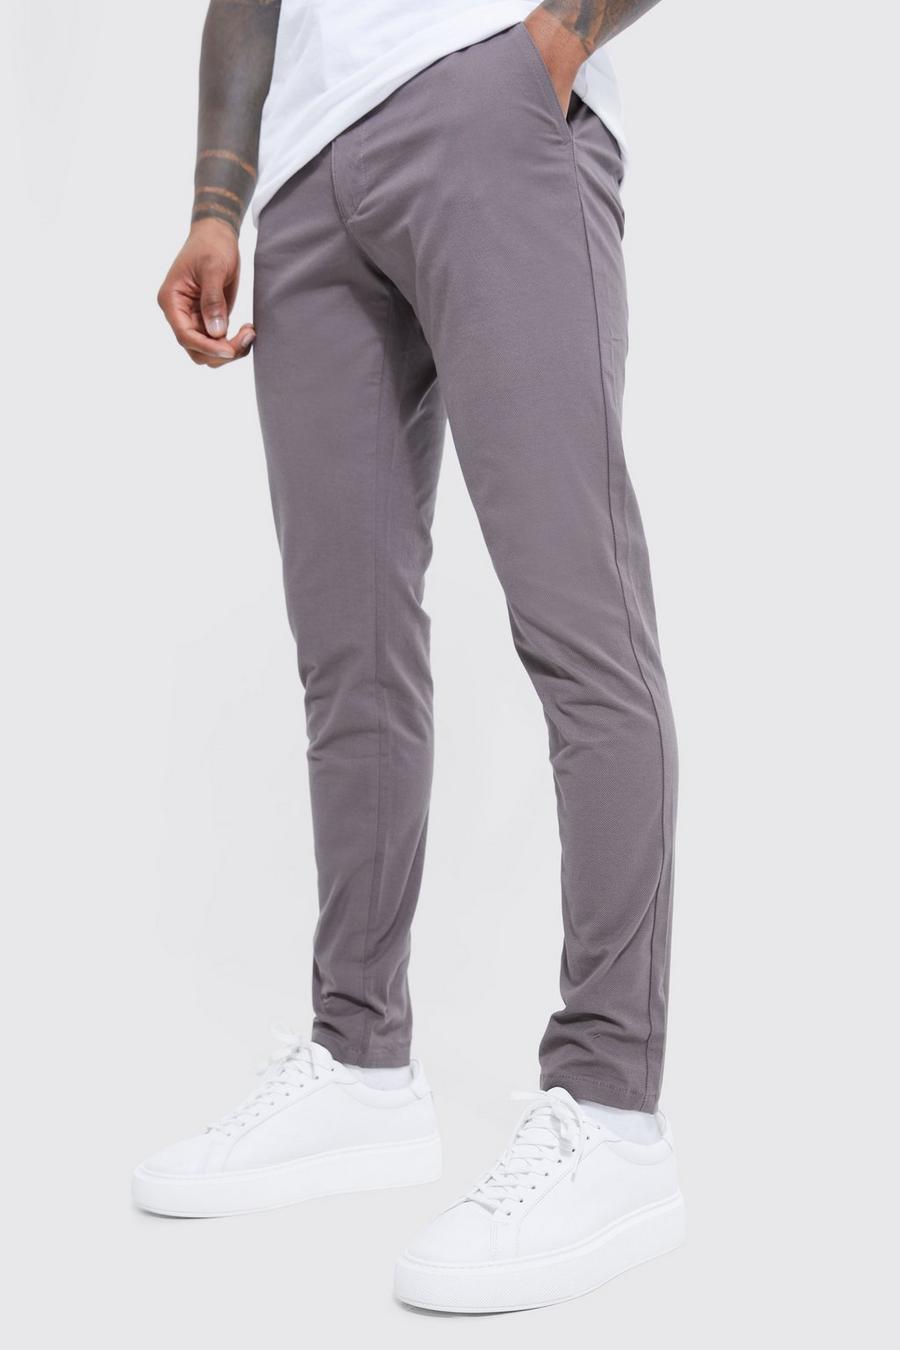 Grey The straight leg fit gives these jeans a flattering slim